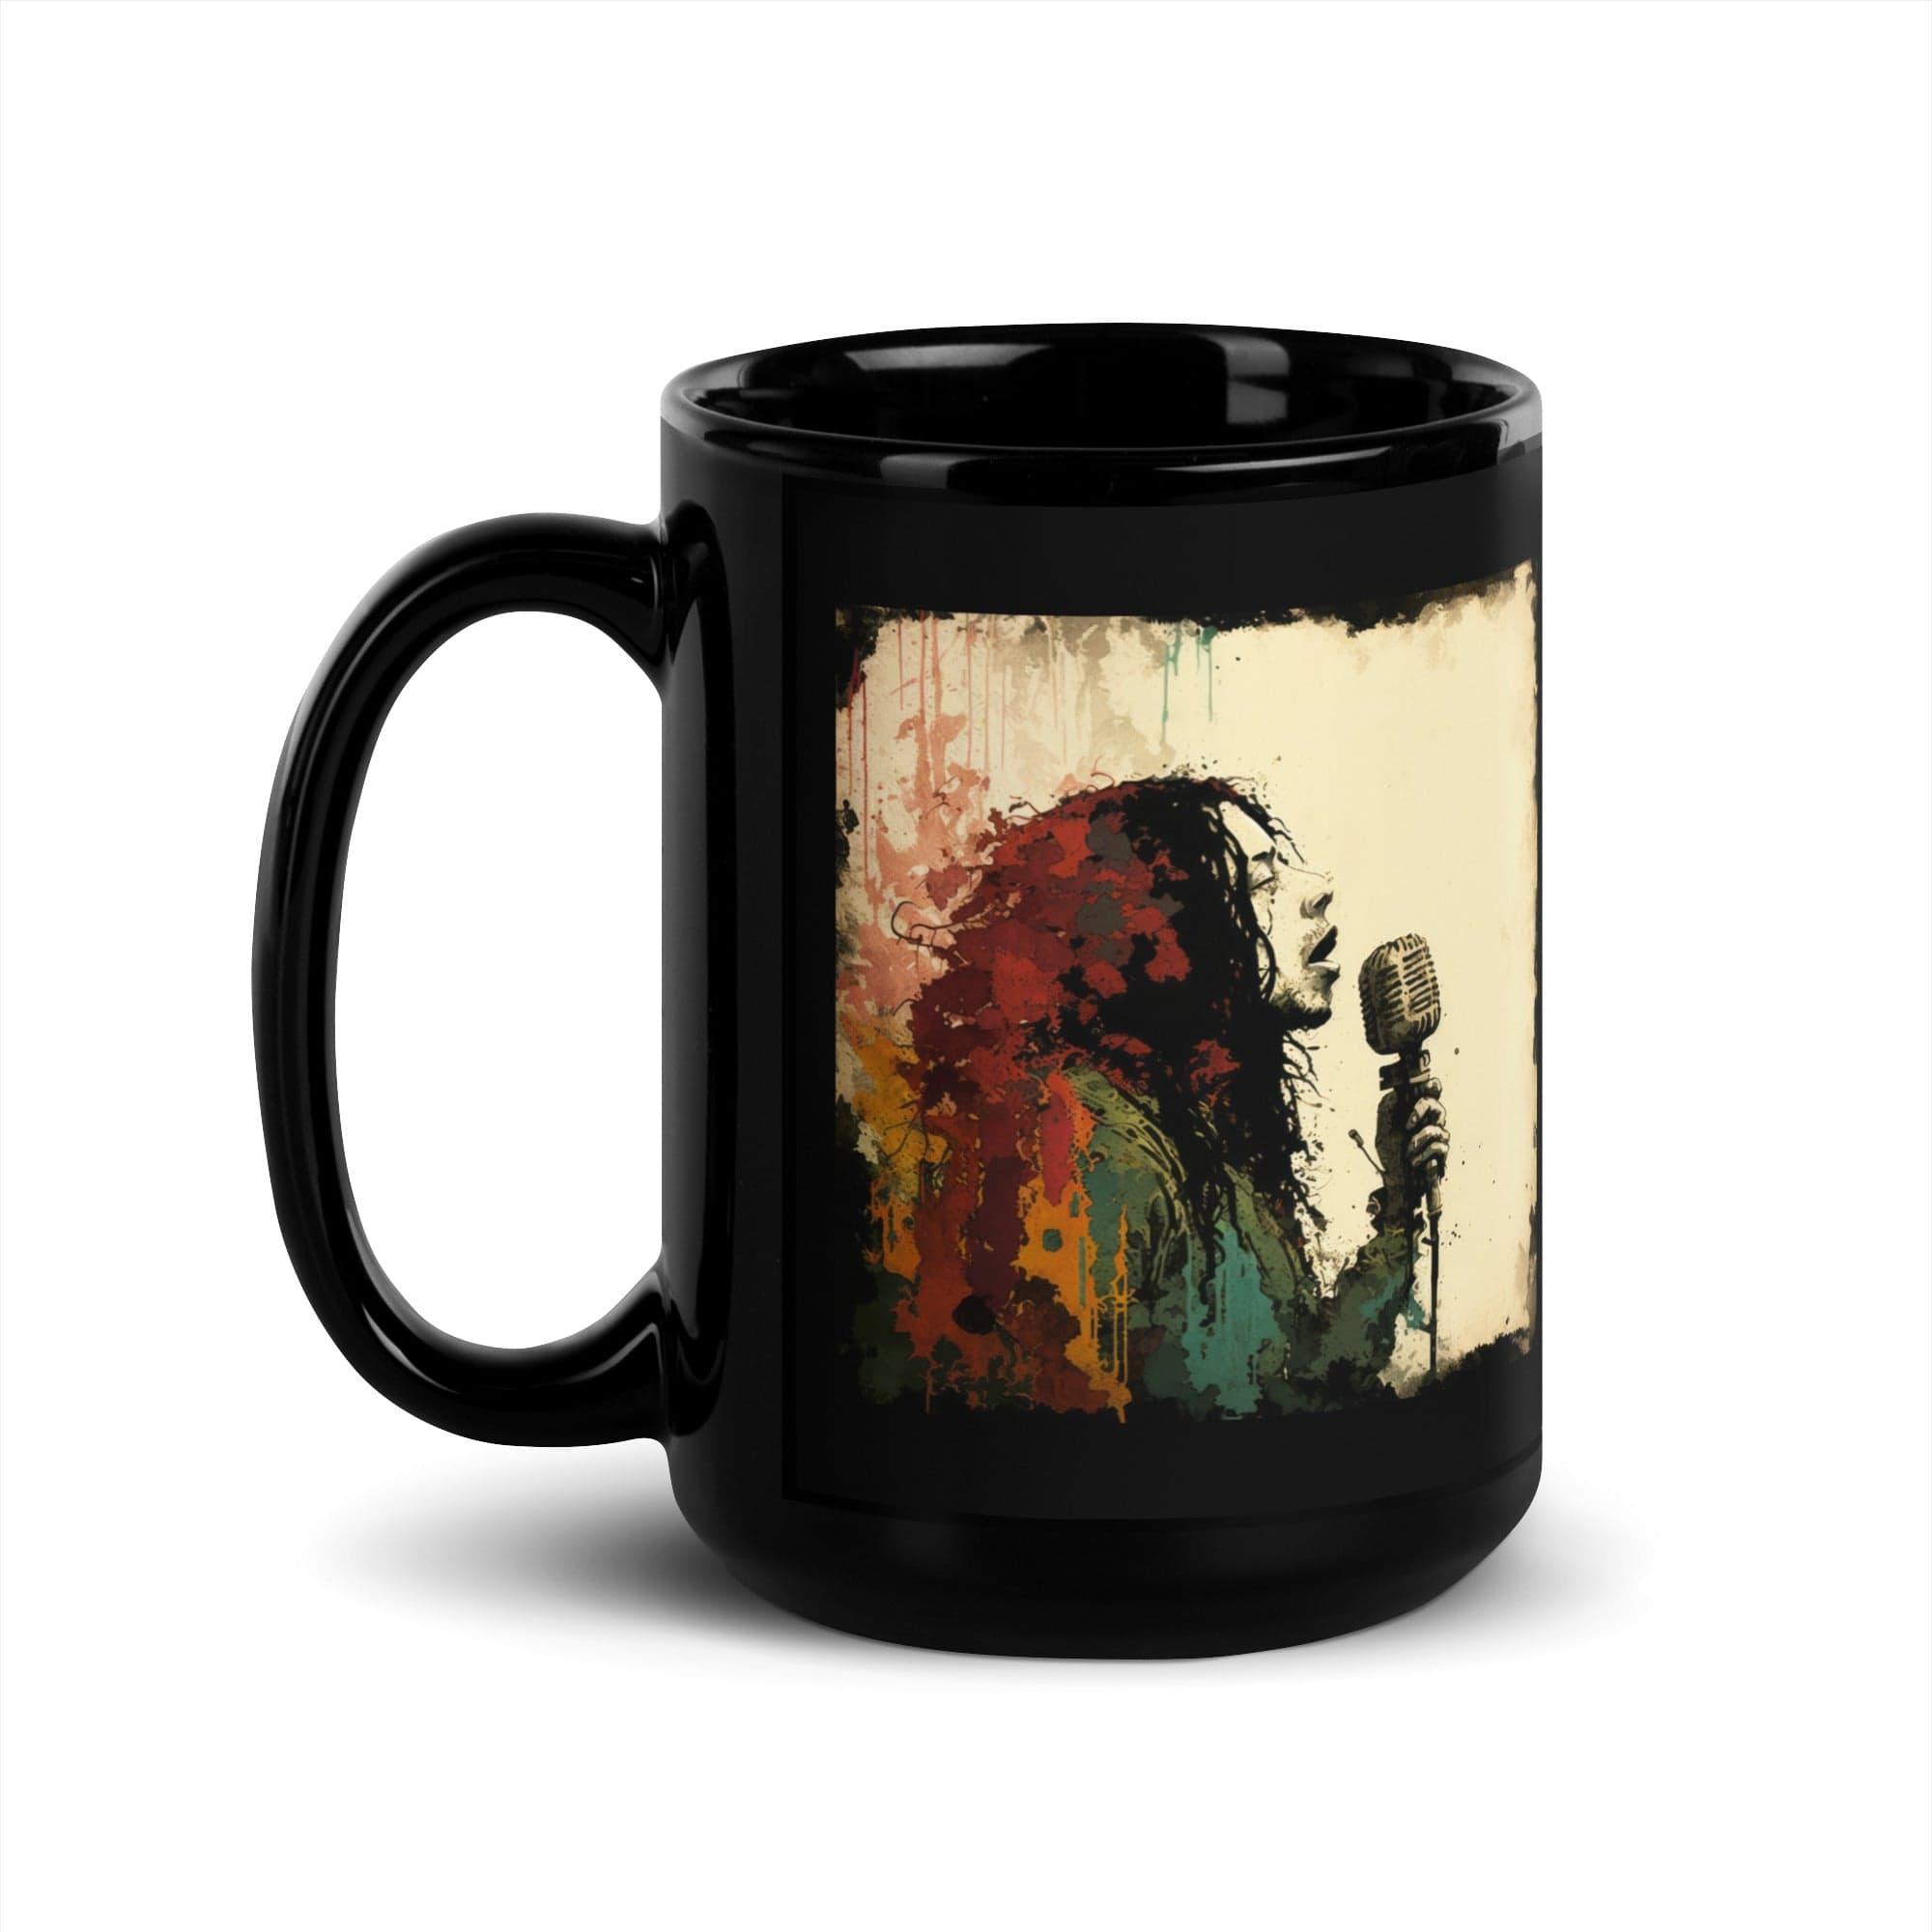 NS-967 Black Glossy Mug filled with coffee, steam visible.